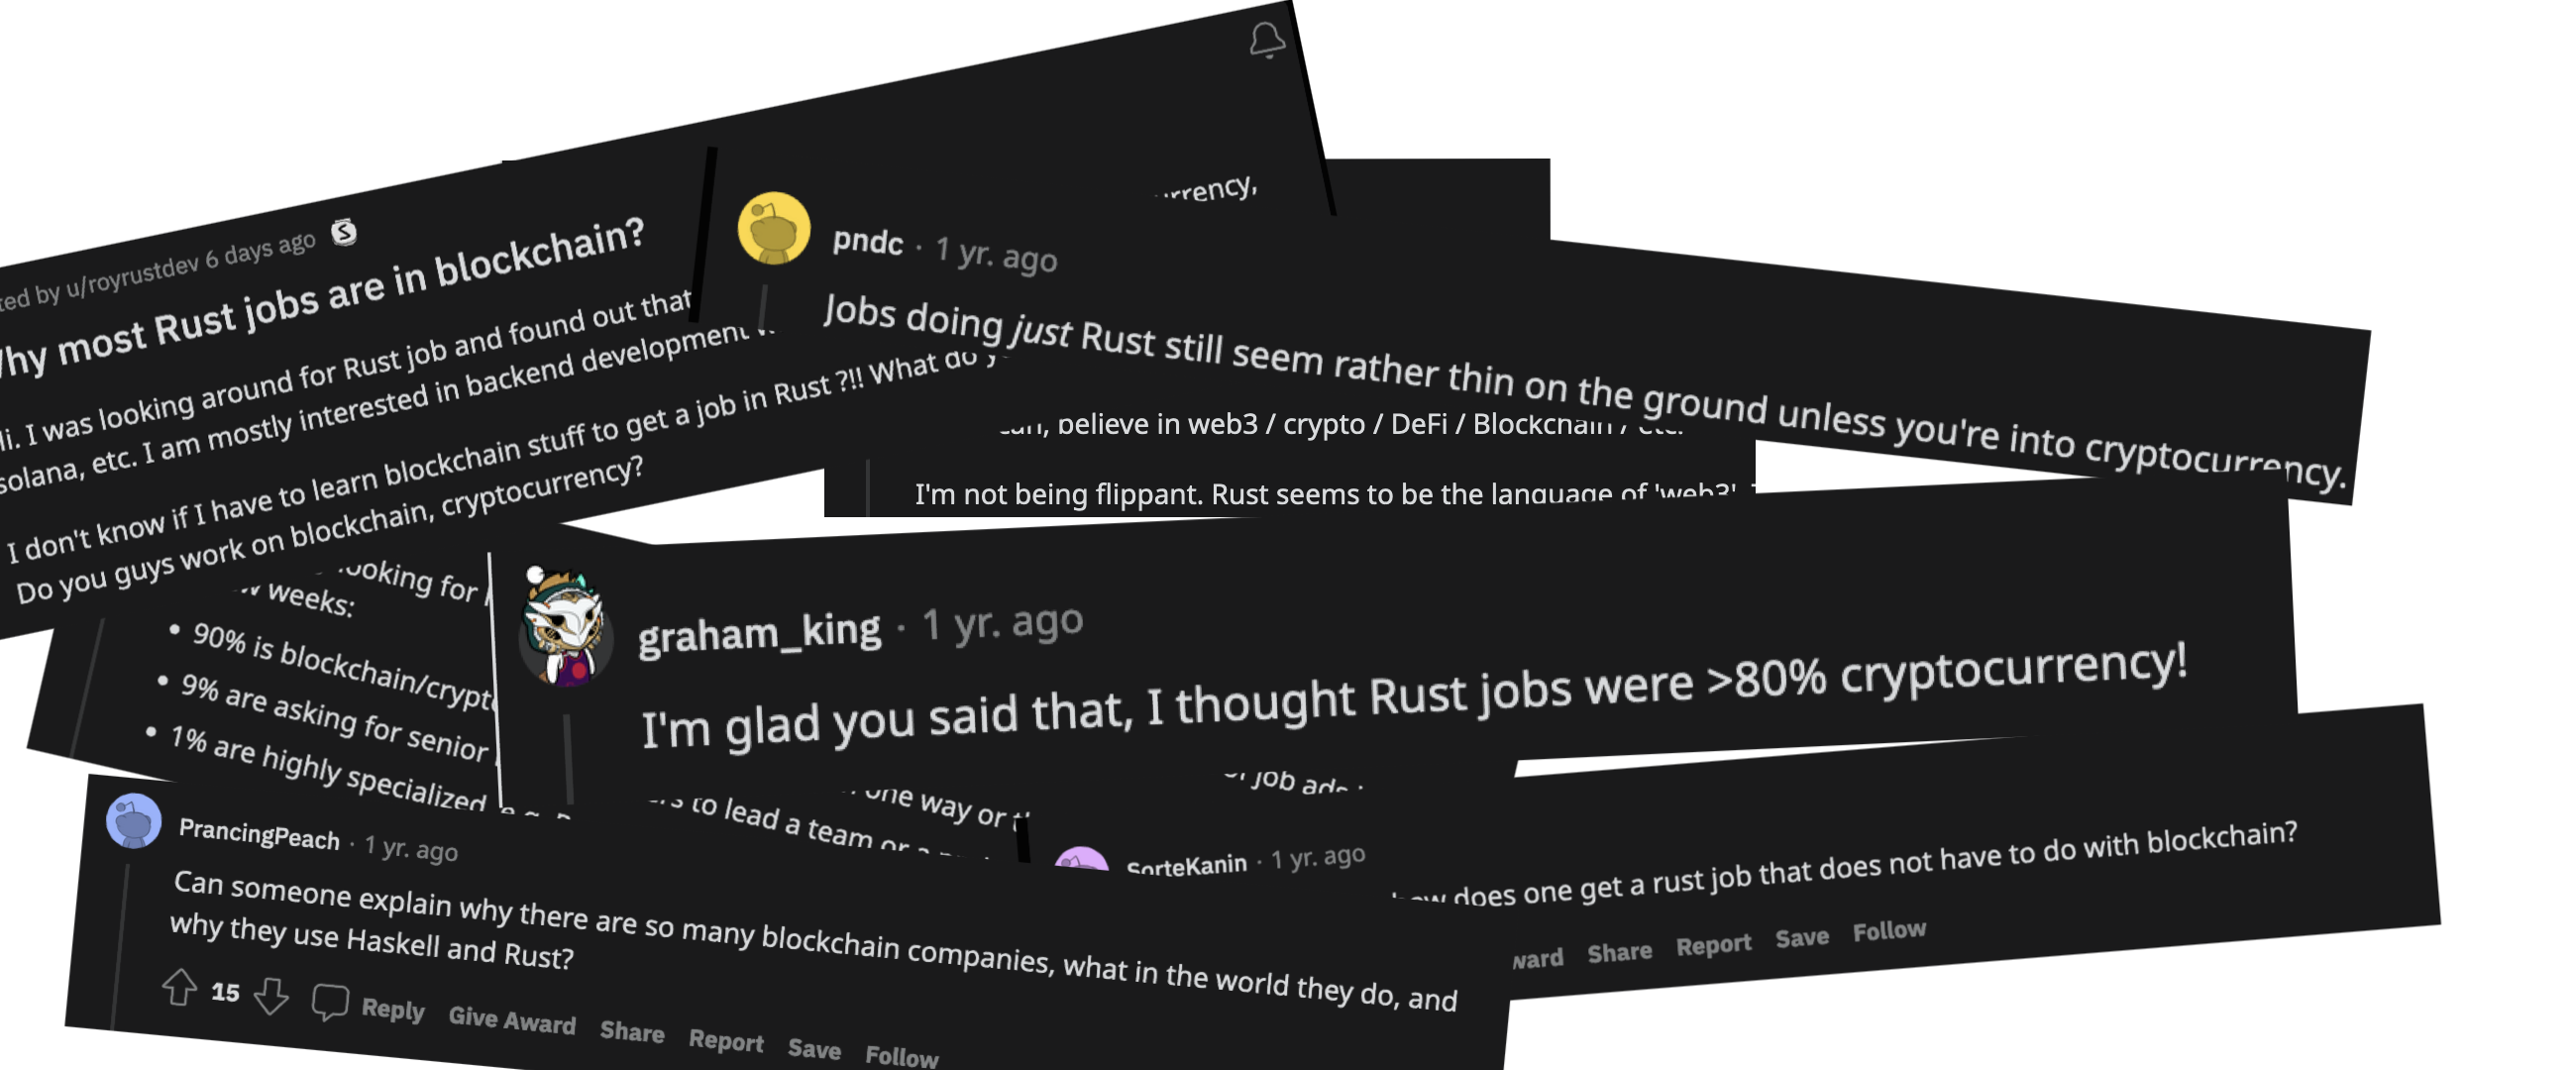 Are Most Rust Jobs In Crypto?